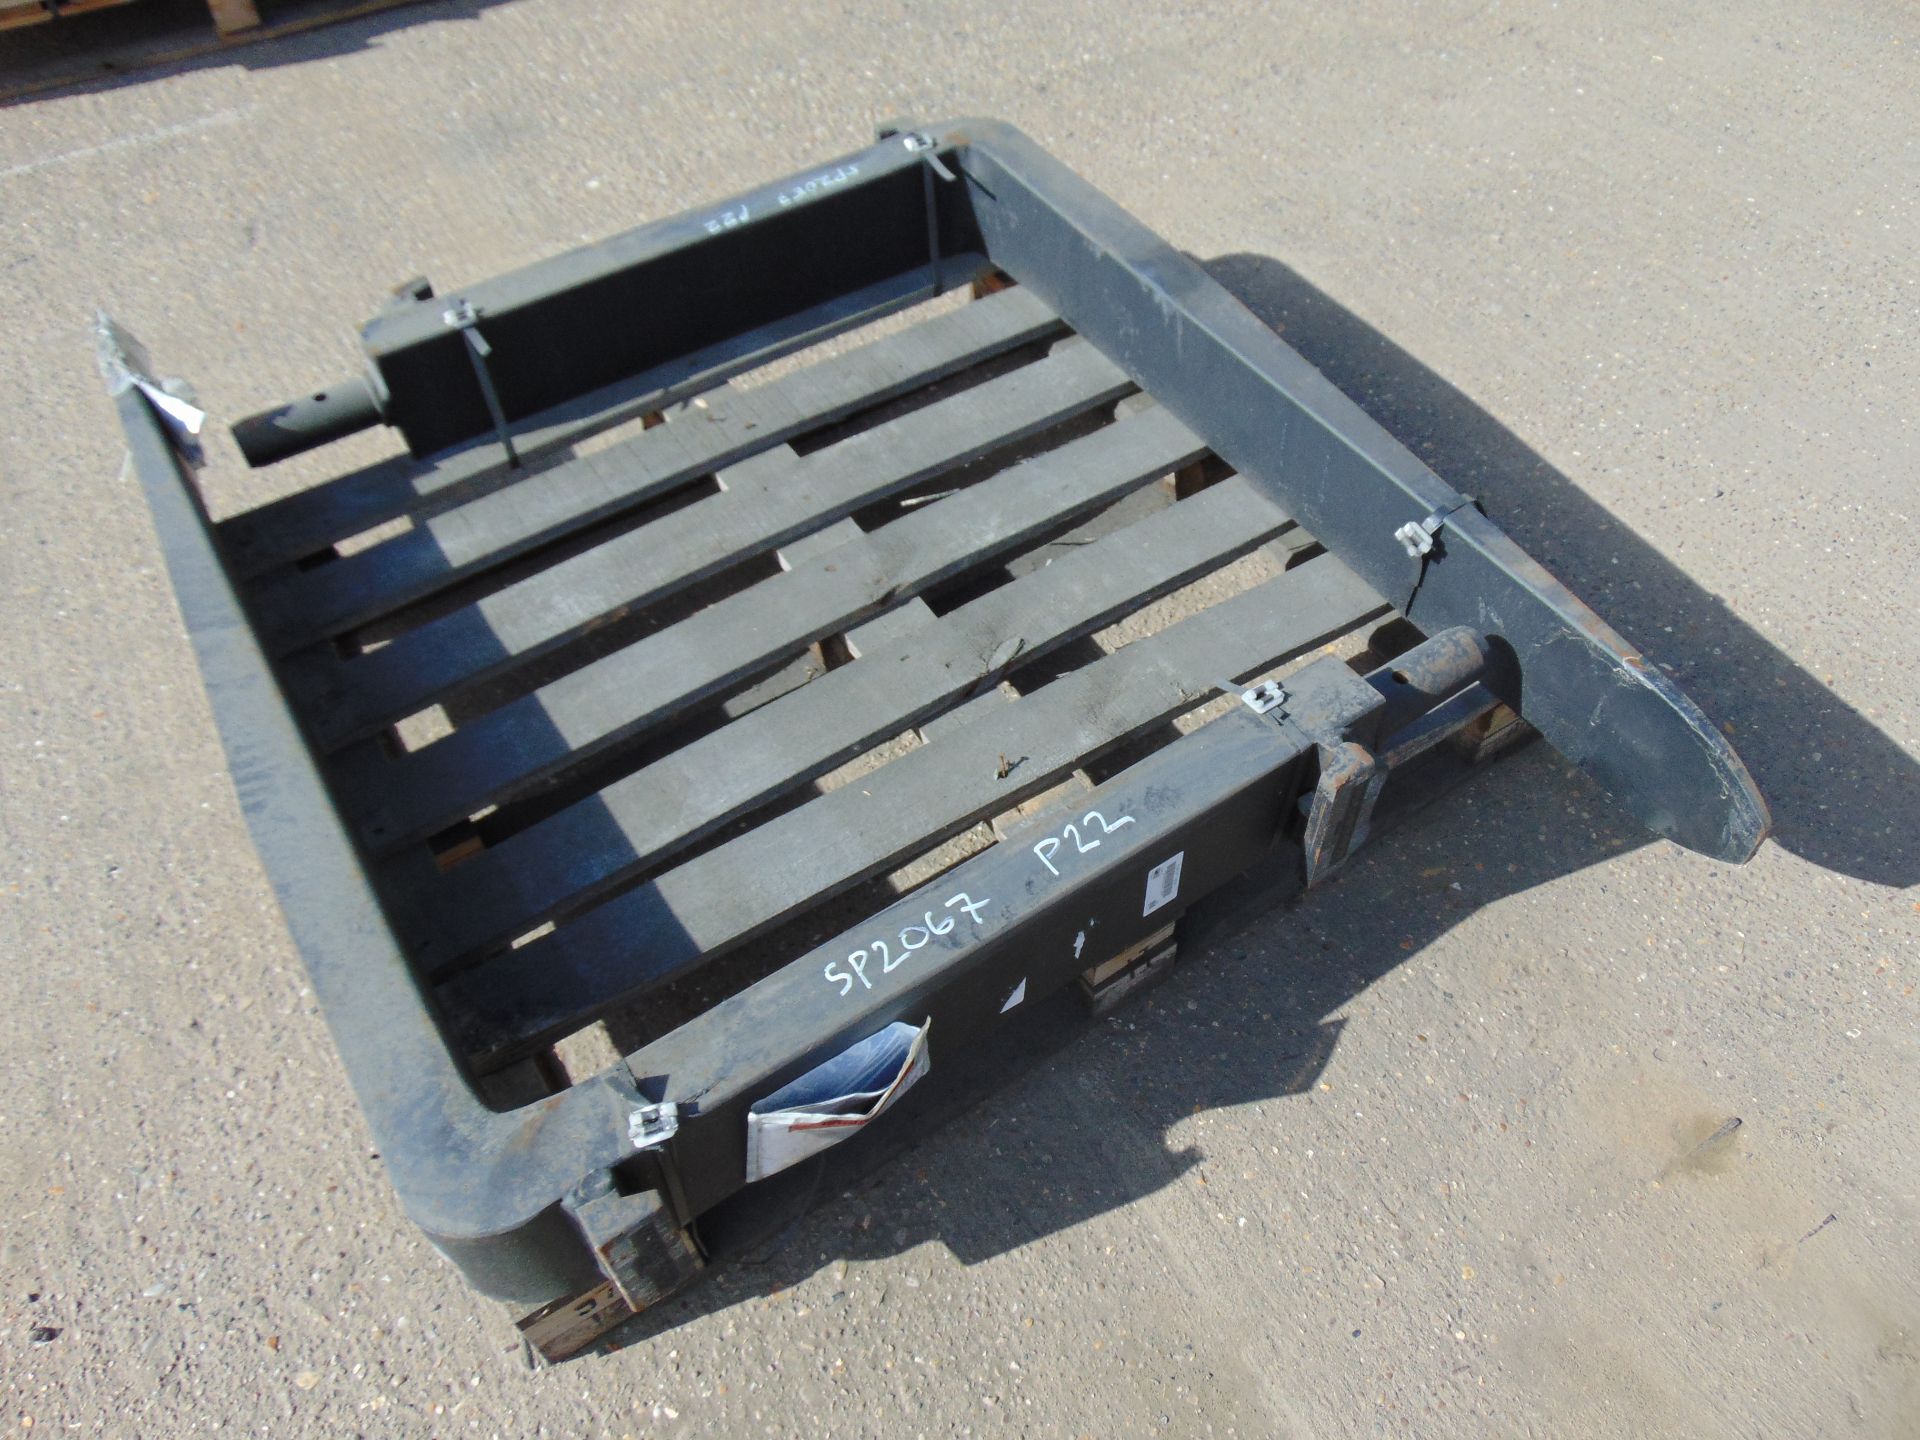 2 x MSI Forklift Tines - Image 2 of 6